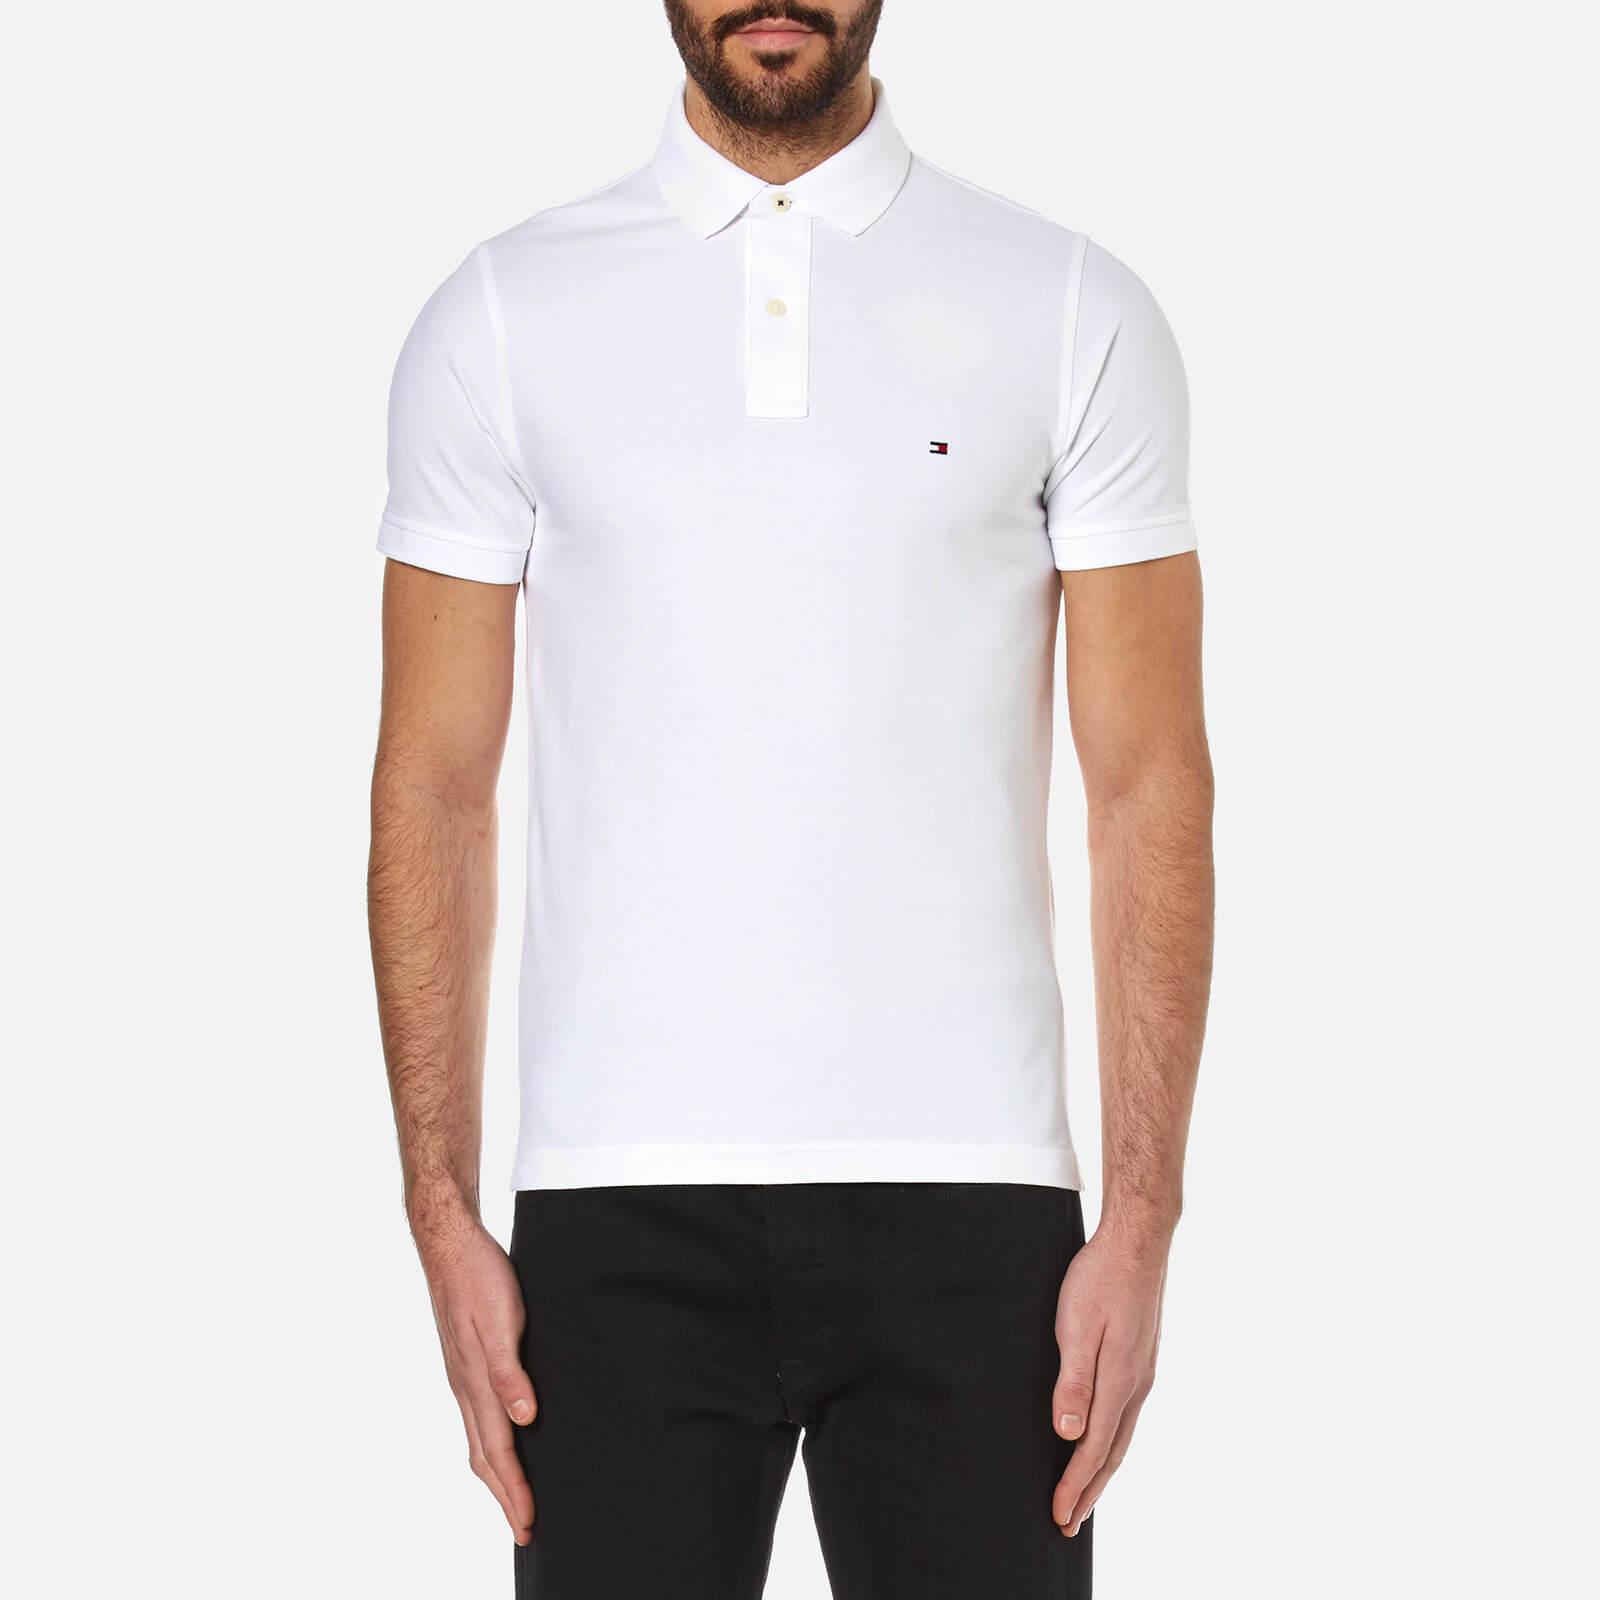 Tommy Hilfiger Cotton White Slim Fit Polo Shirt for Men - Lyst